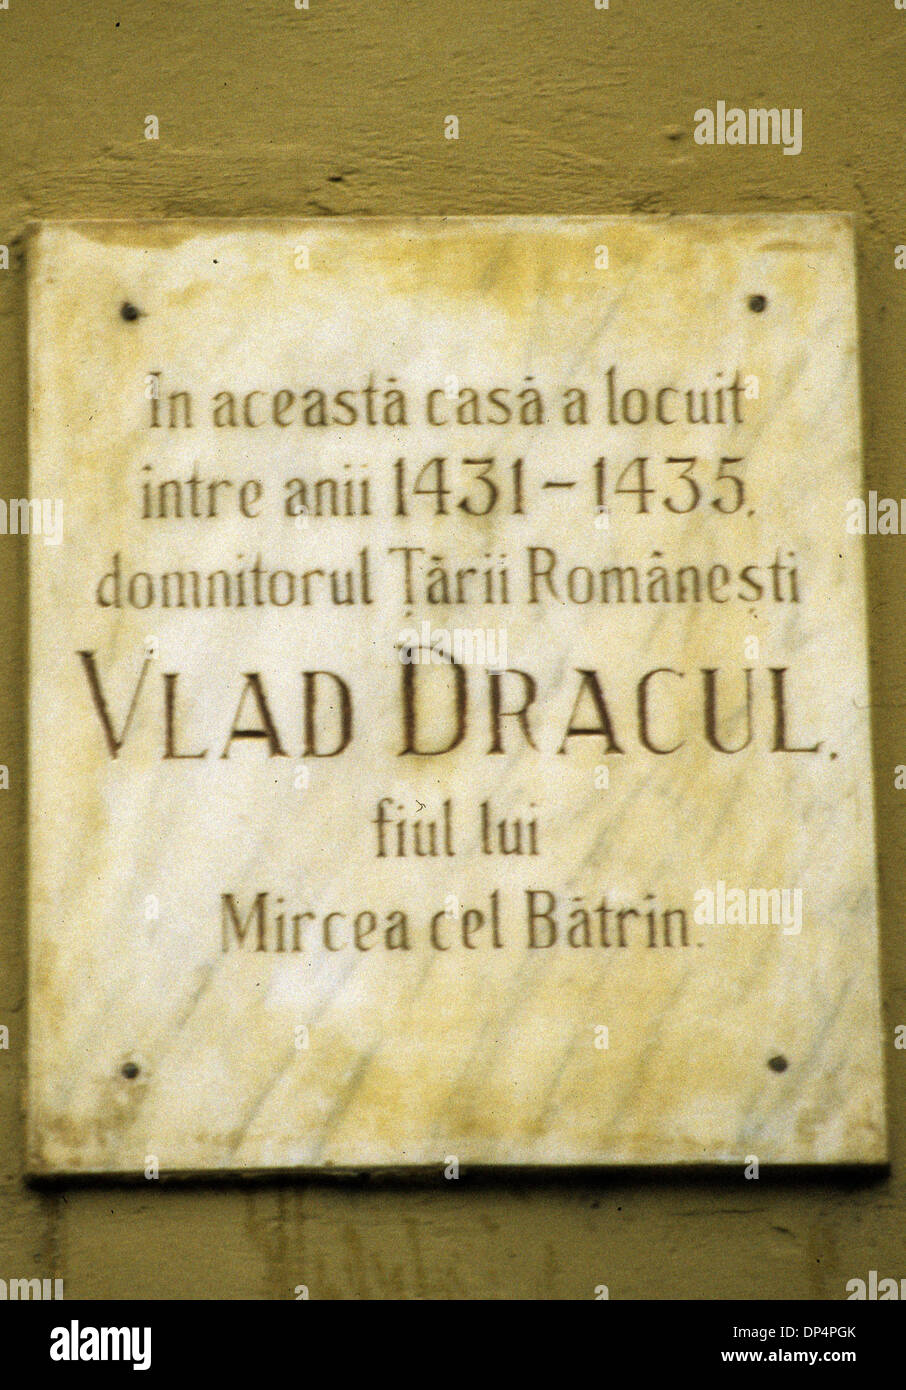 Aug 21, 2006; Sighisoara, ROMANIA; A plaque on the building where Romanian prince Vlad Dracul was born. Mandatory Credit: Photo by Richard Clement/ZUMA Press. (©) Copyright 2006 by Richard Clement Stock Photo